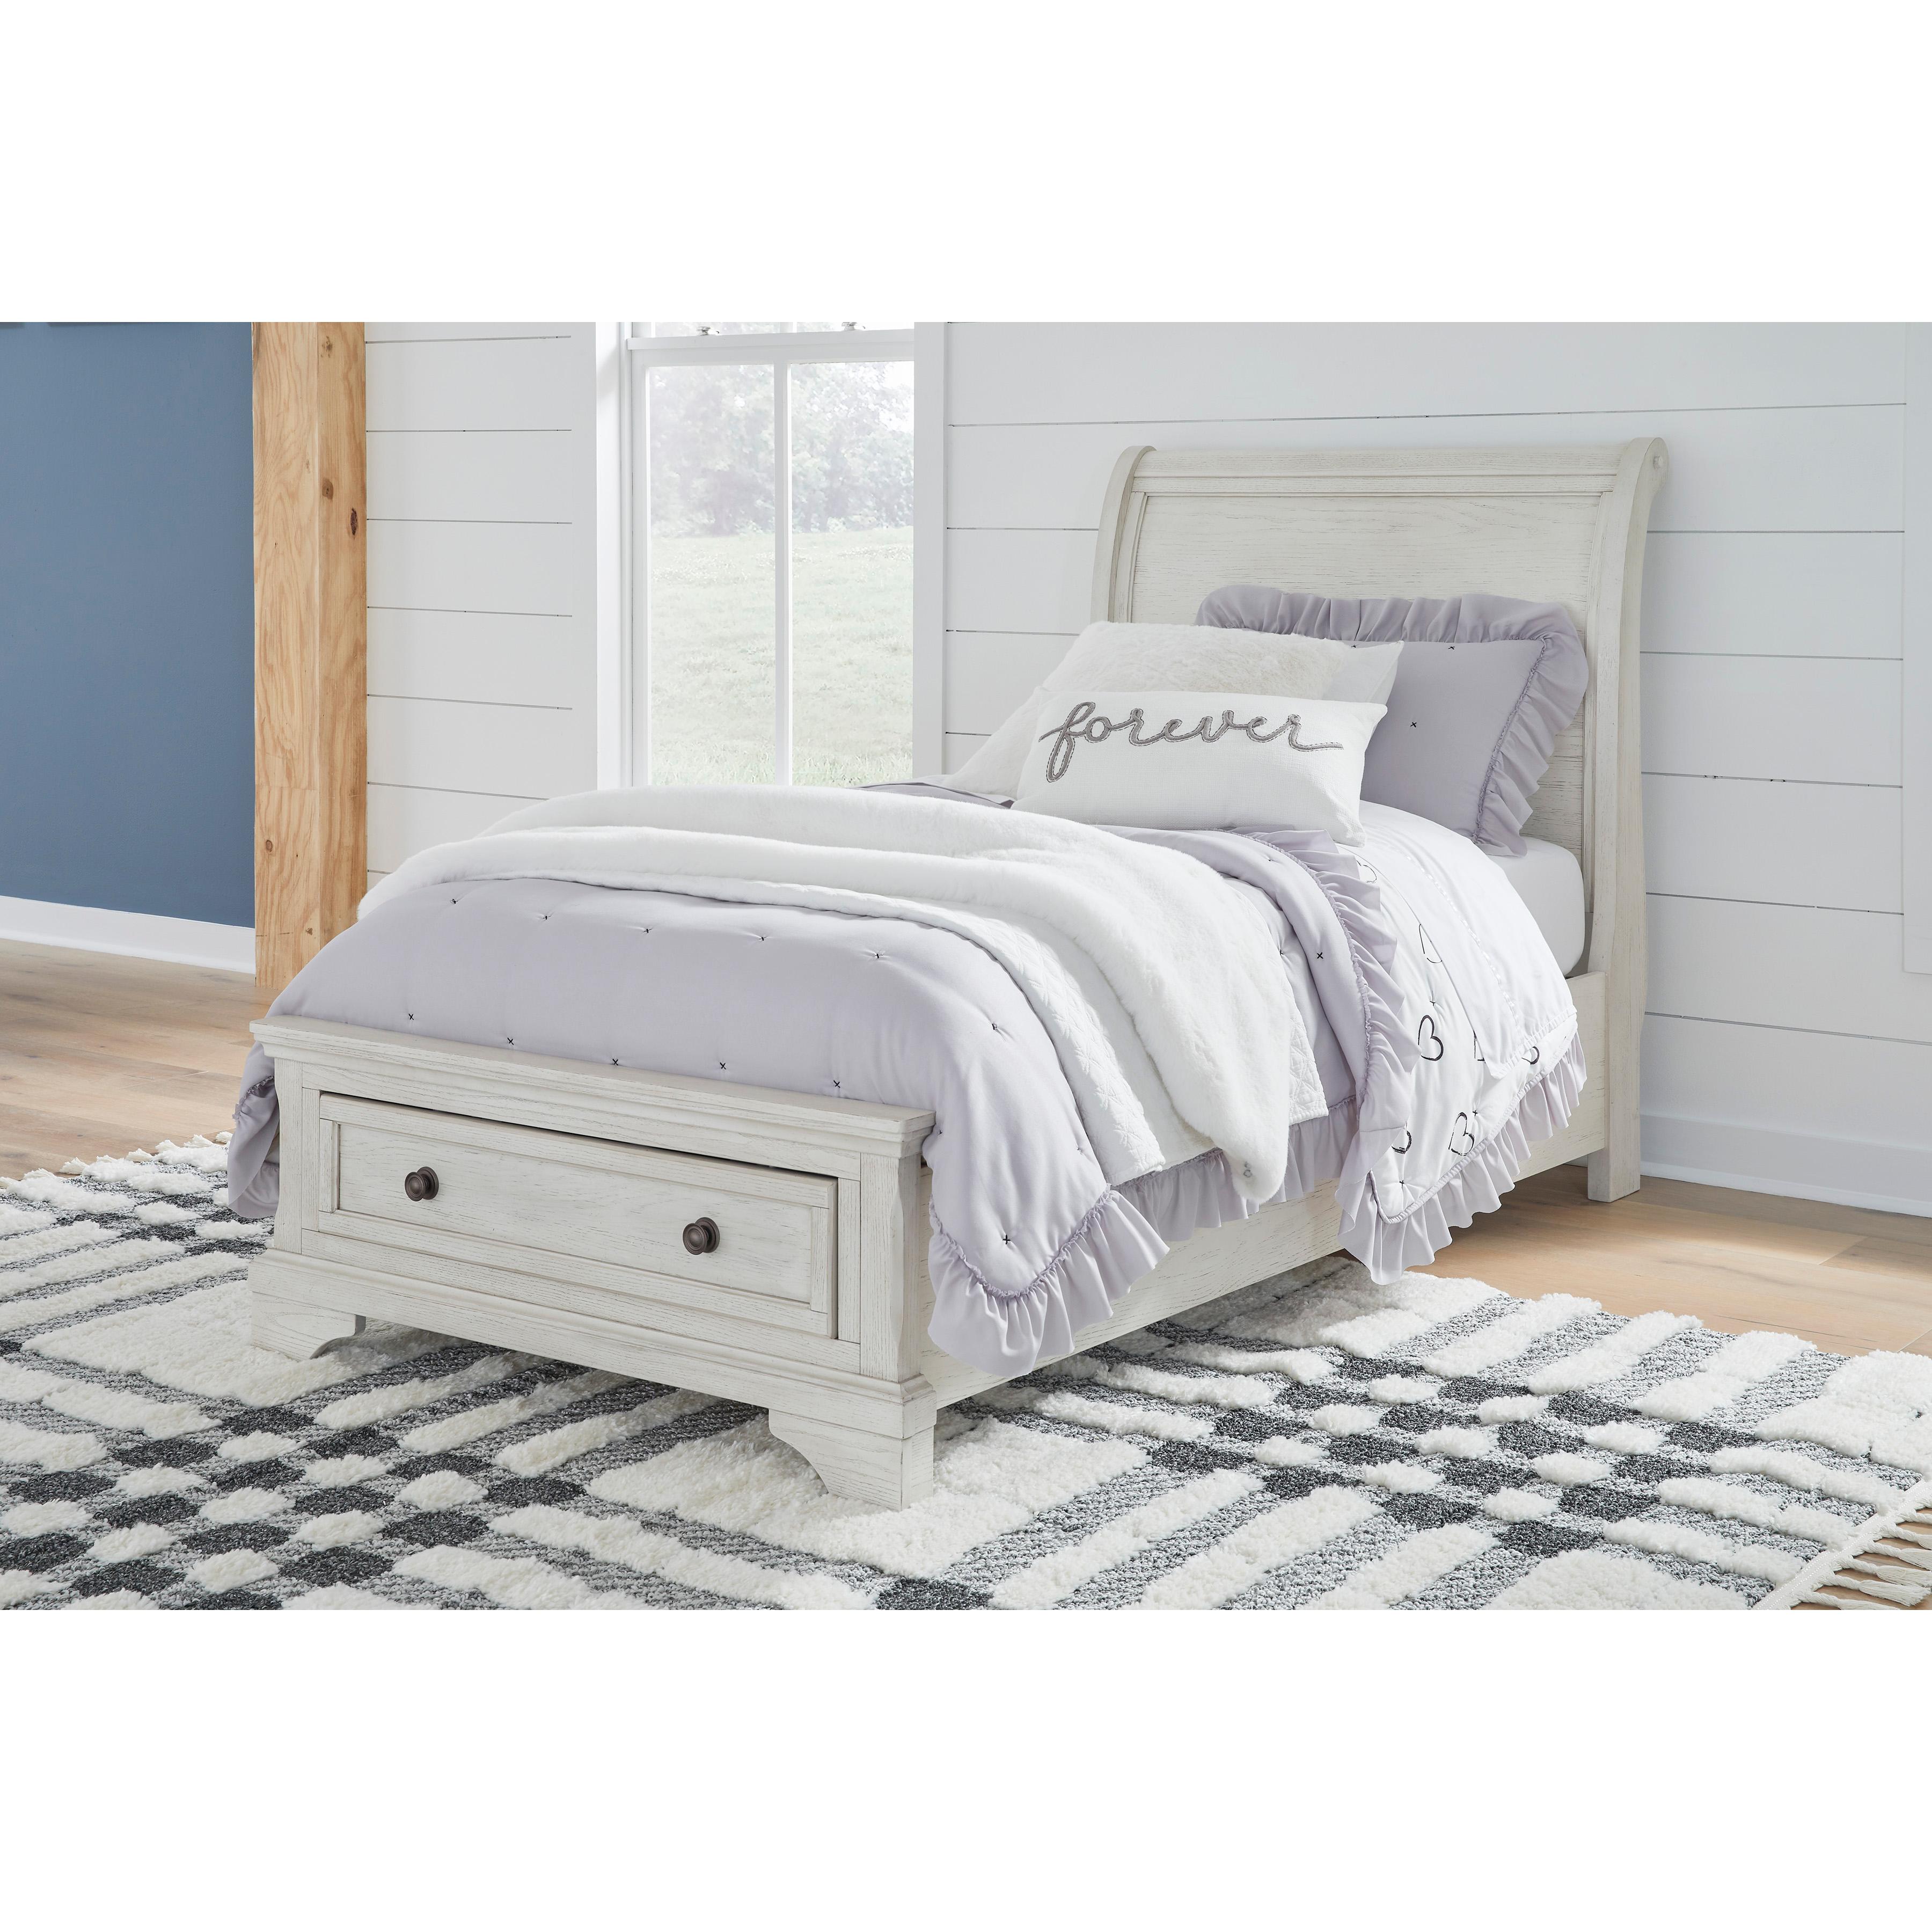 Signature Design by Ashley Kids Beds Bed B742-53/B742-52S/B742-183 IMAGE 5